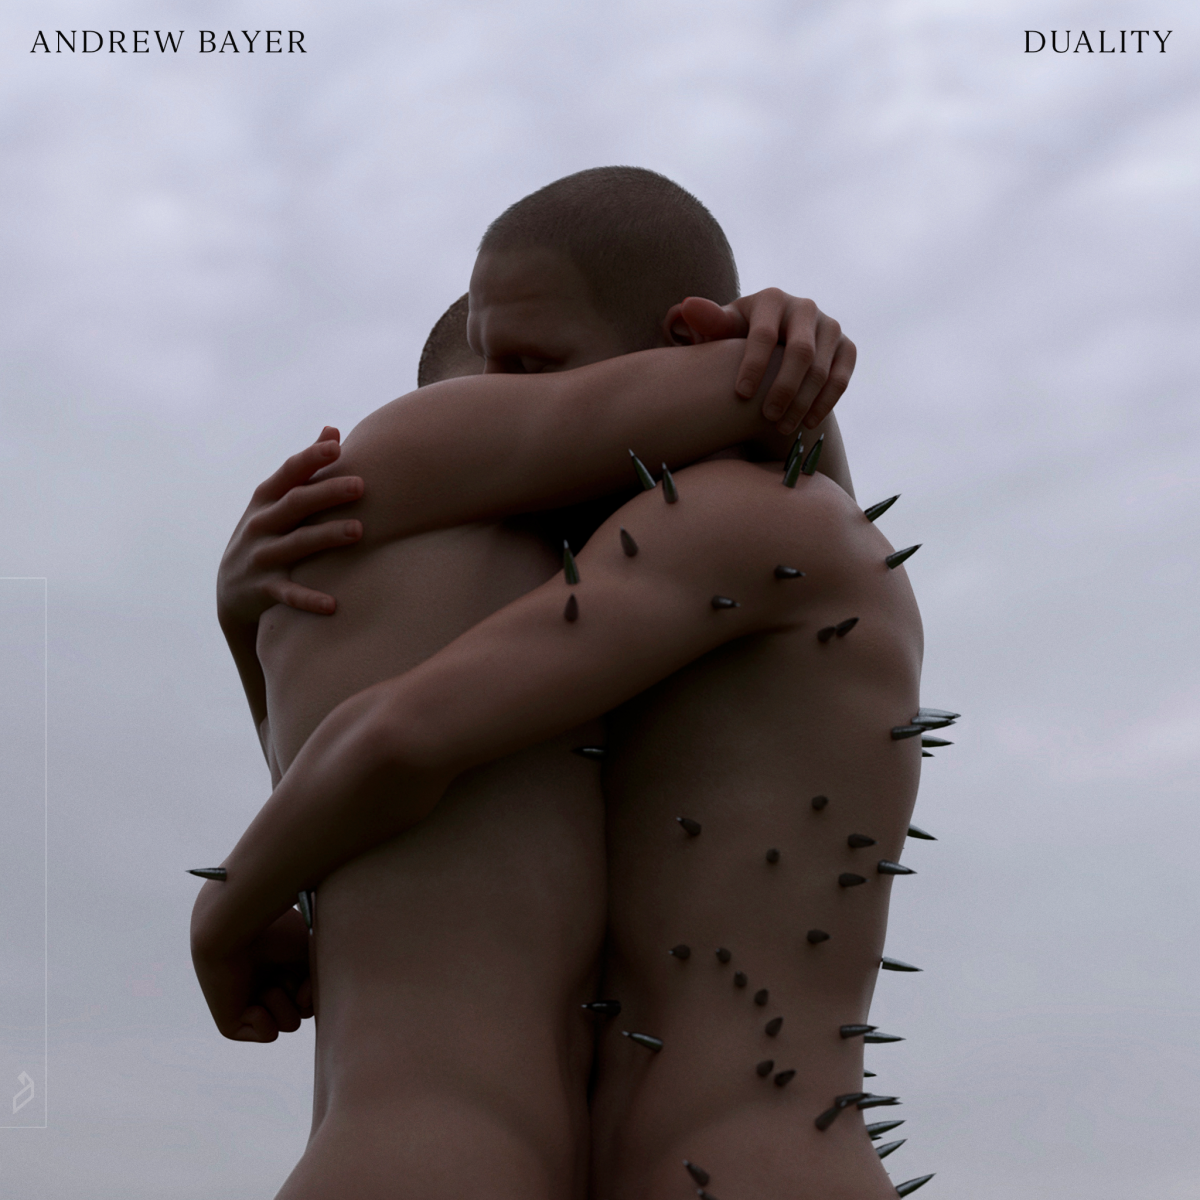 Cover art of Andrew Bayer's double album, "Duality."